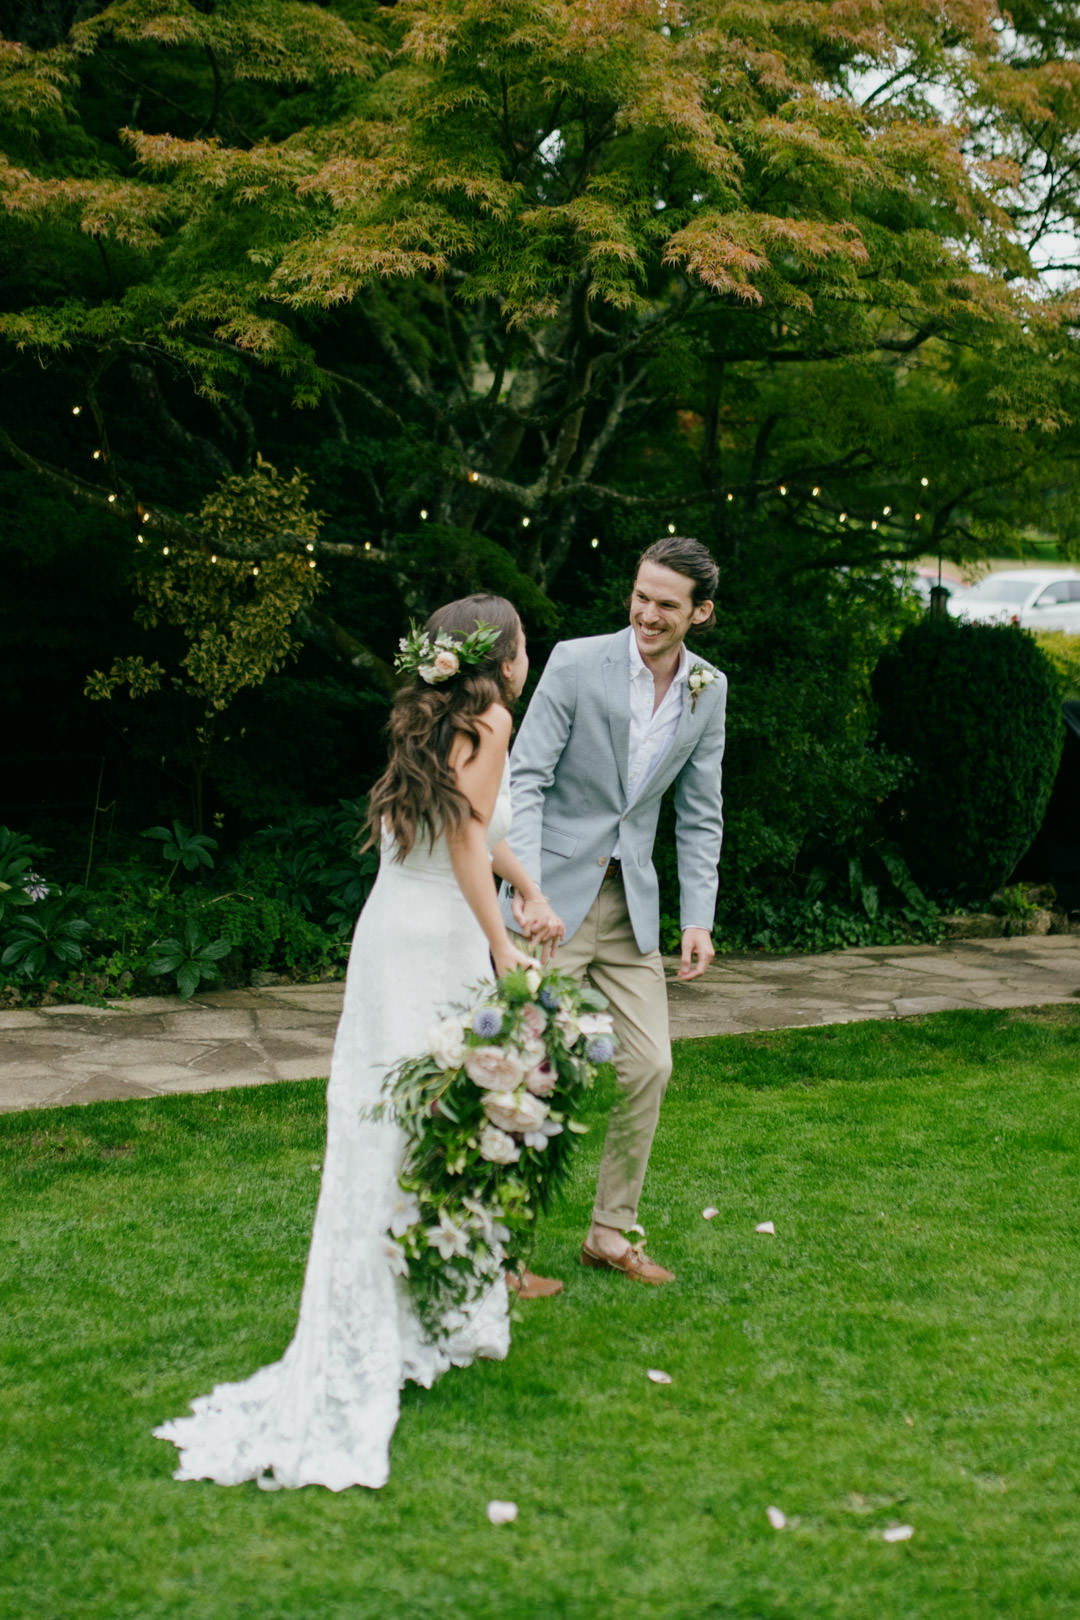 bride waring flower crown in garden with large trees